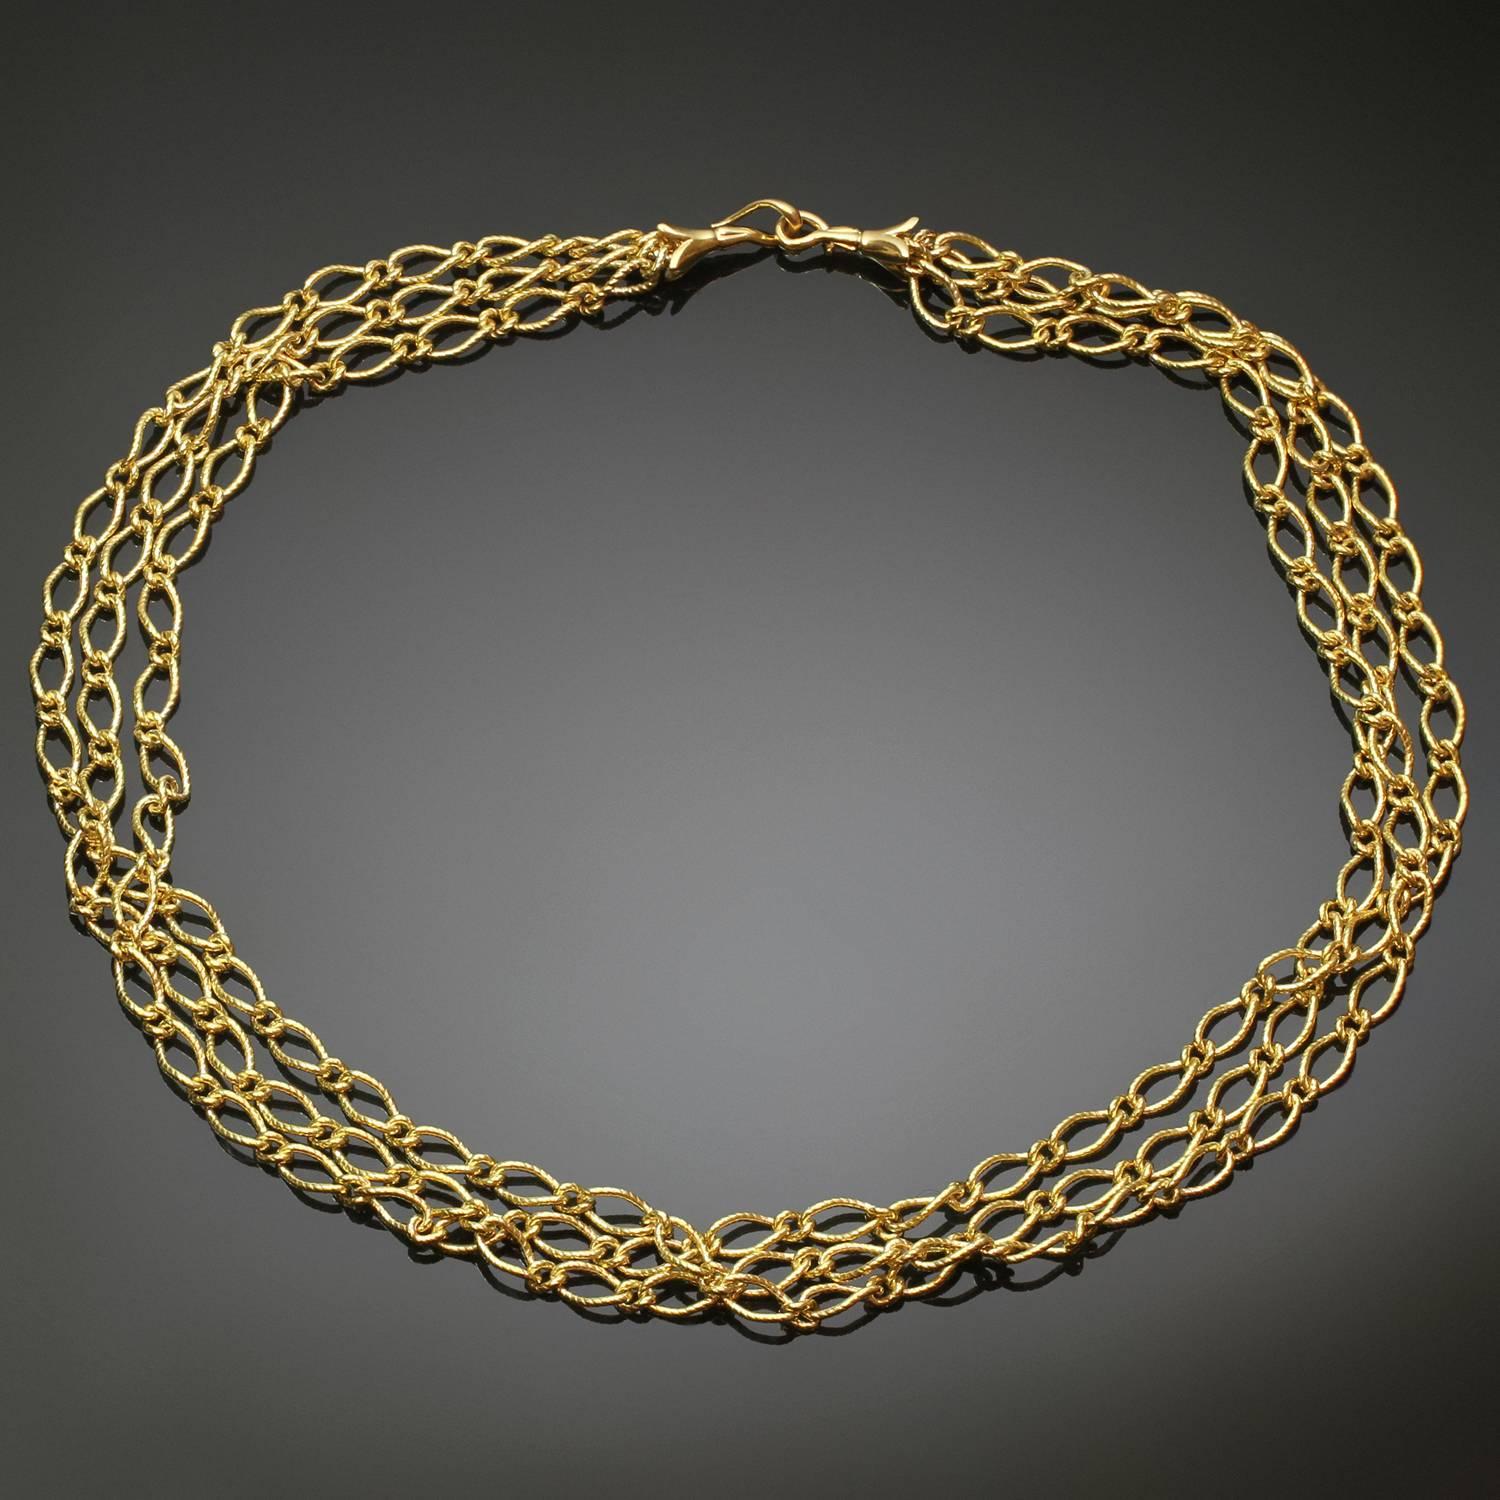 This elegant necklace features 3 rows of chained links crafted in 18k yellow gold. Made in Italy circa 1990s. Measurements: 16.5